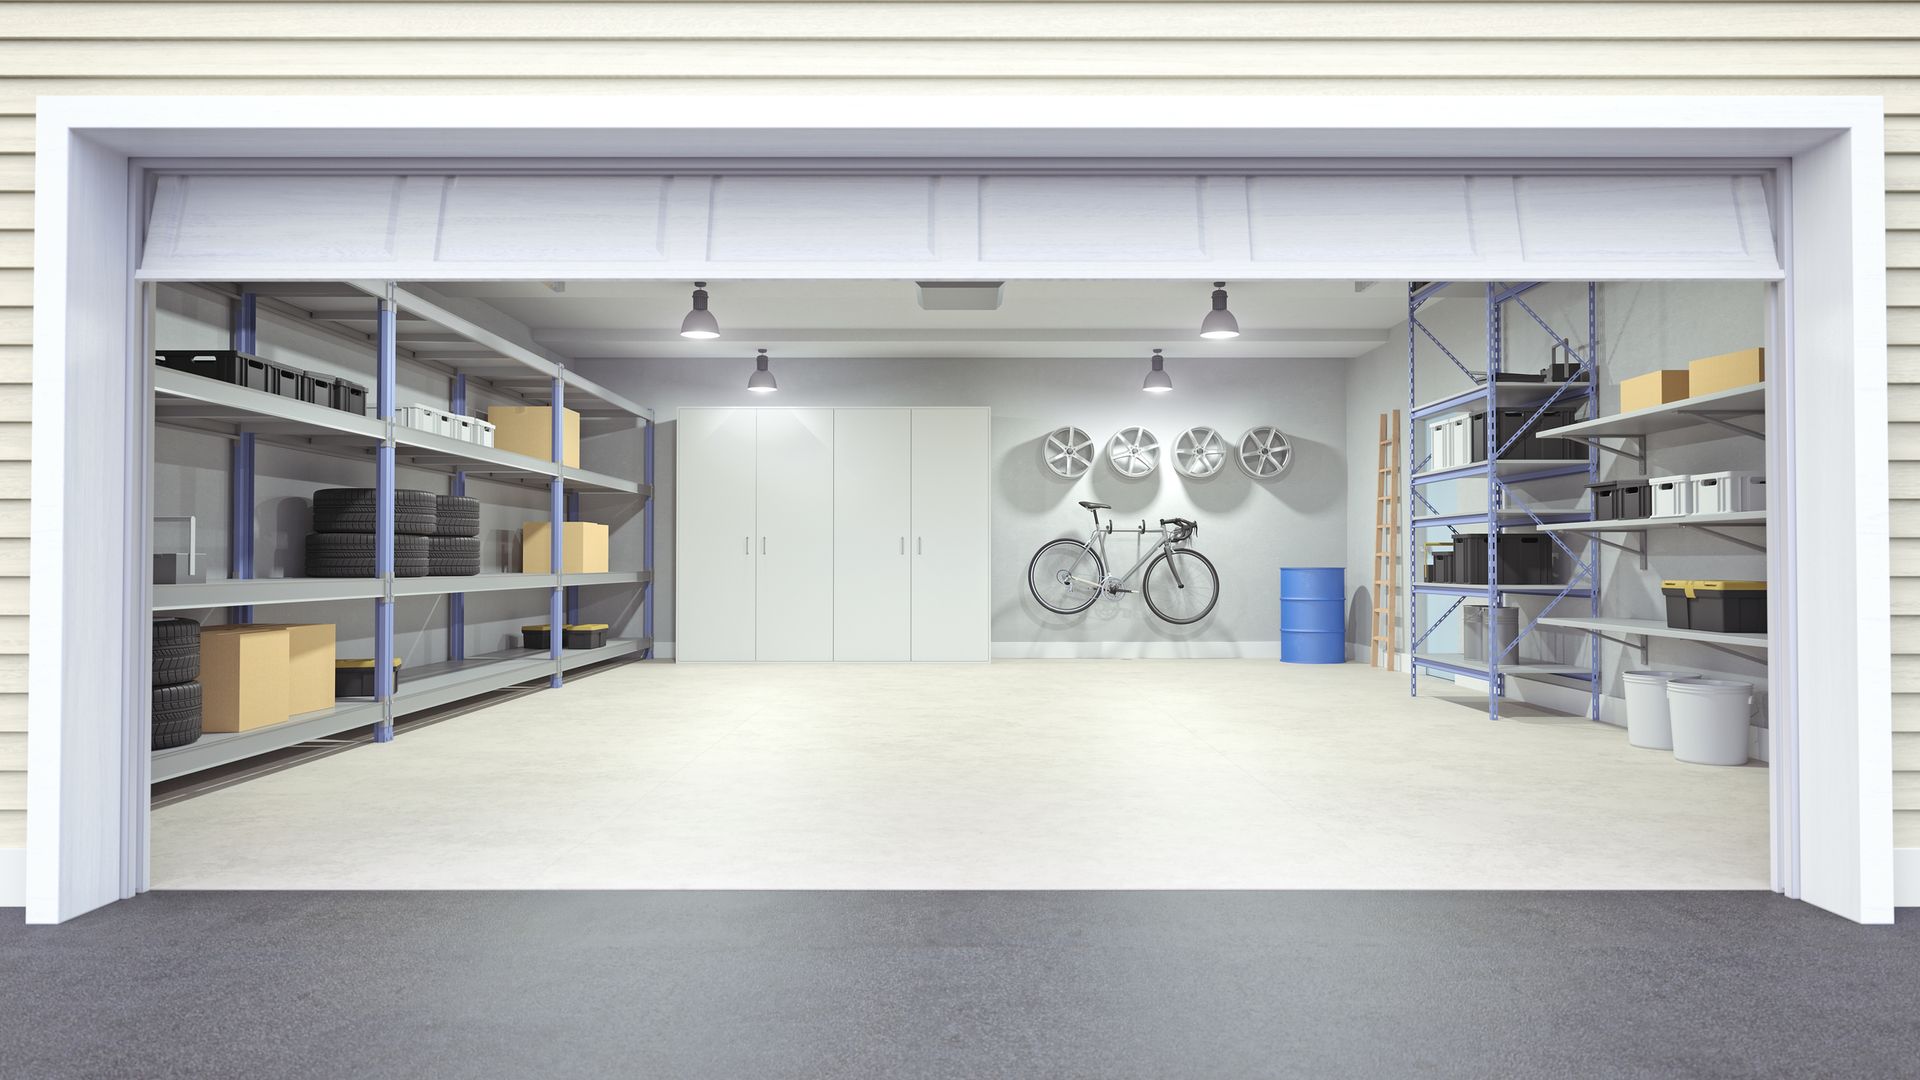 A Garage with A Bicycle Hanging on The Wall and Shelves - Rochester Hills, MI - J & B Doors